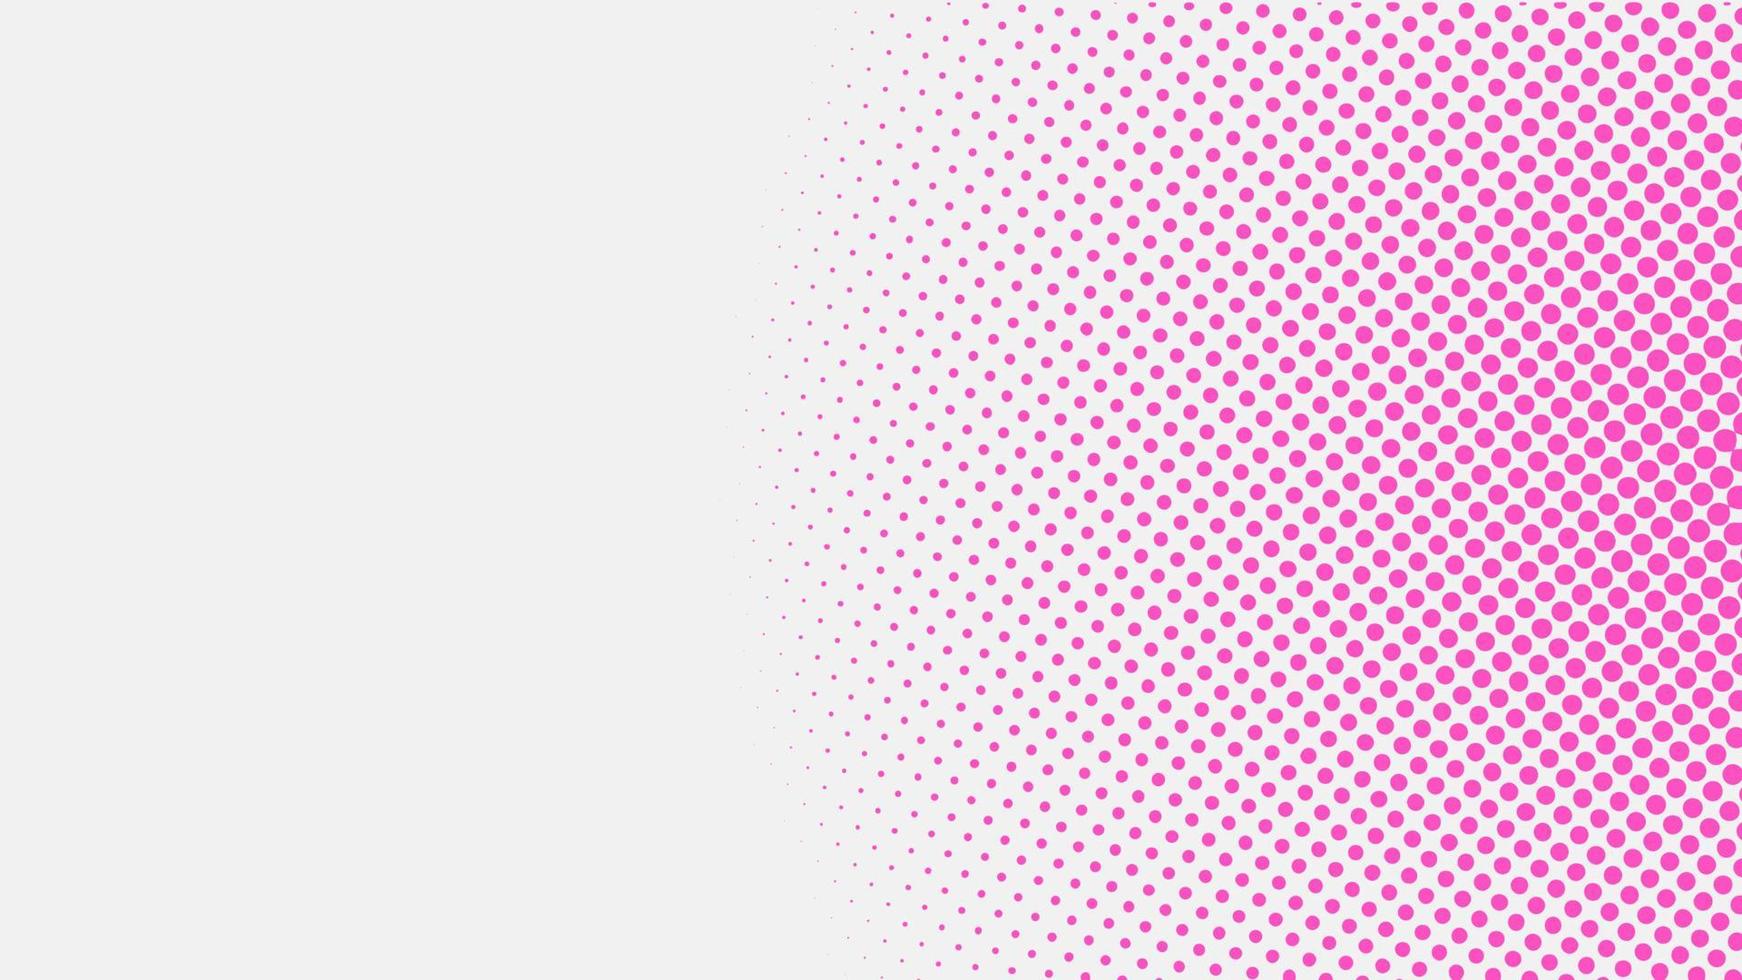 Colorful Pinky Halftone Background Design Template, Pop Art, Abstract Dots Pattern Illustration, Vintage Texture Element, Pink White Gradation, Rounded Shape, Polka-dotted, polkadot, Vector EPS 10